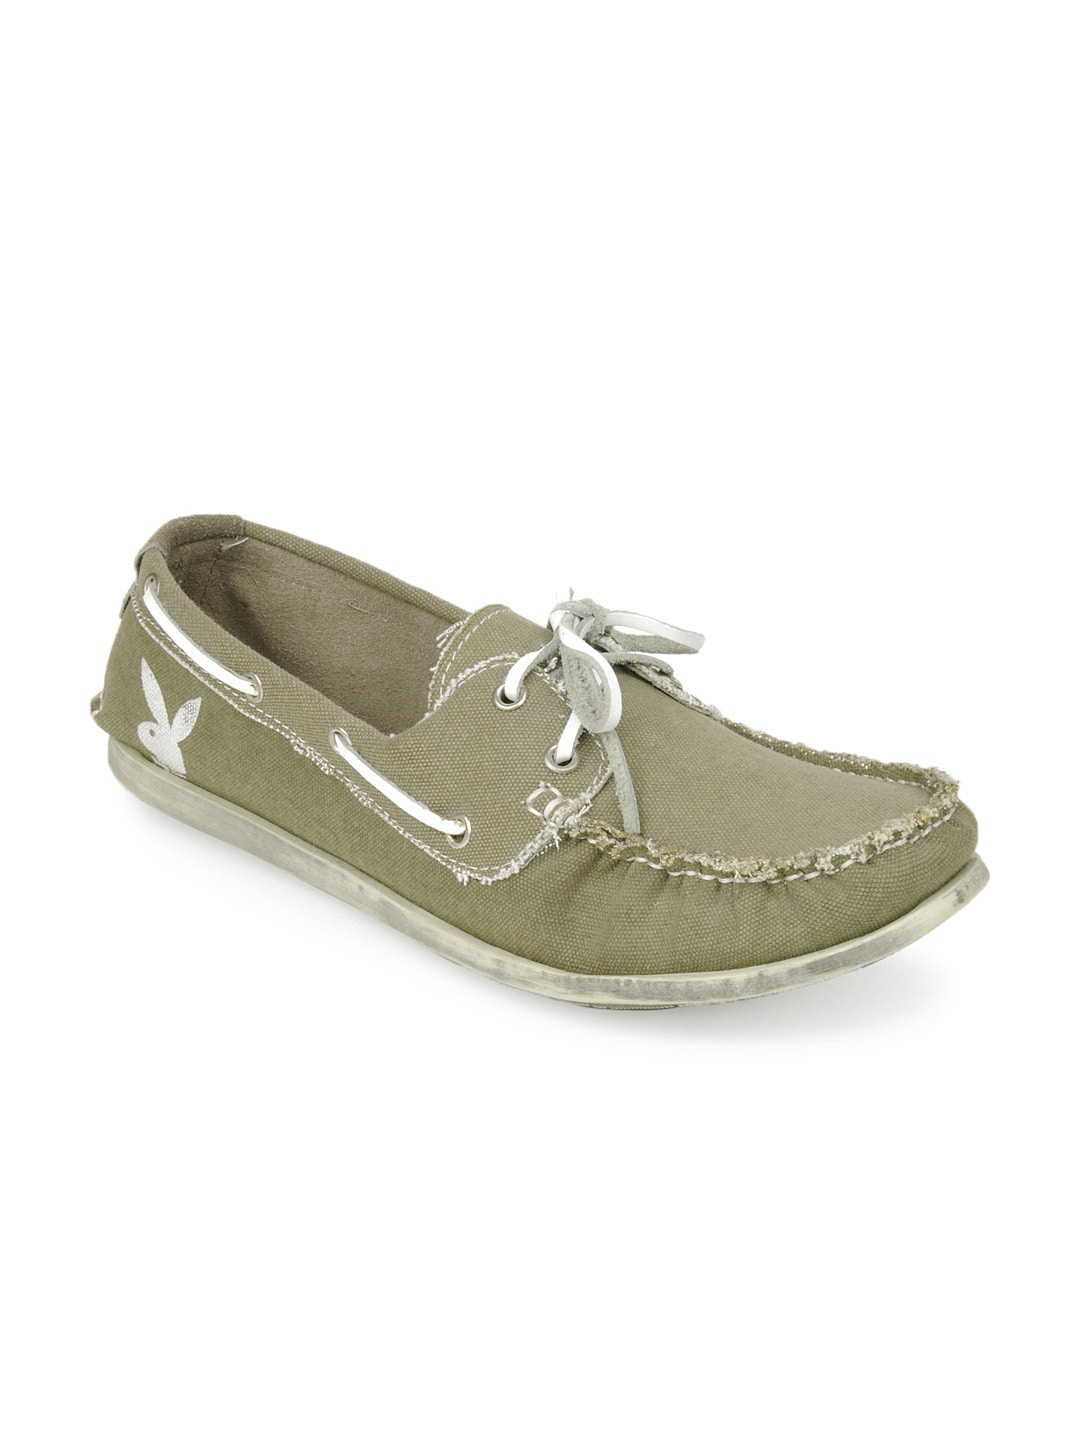 Playboy Men Military Green Boat Shoes